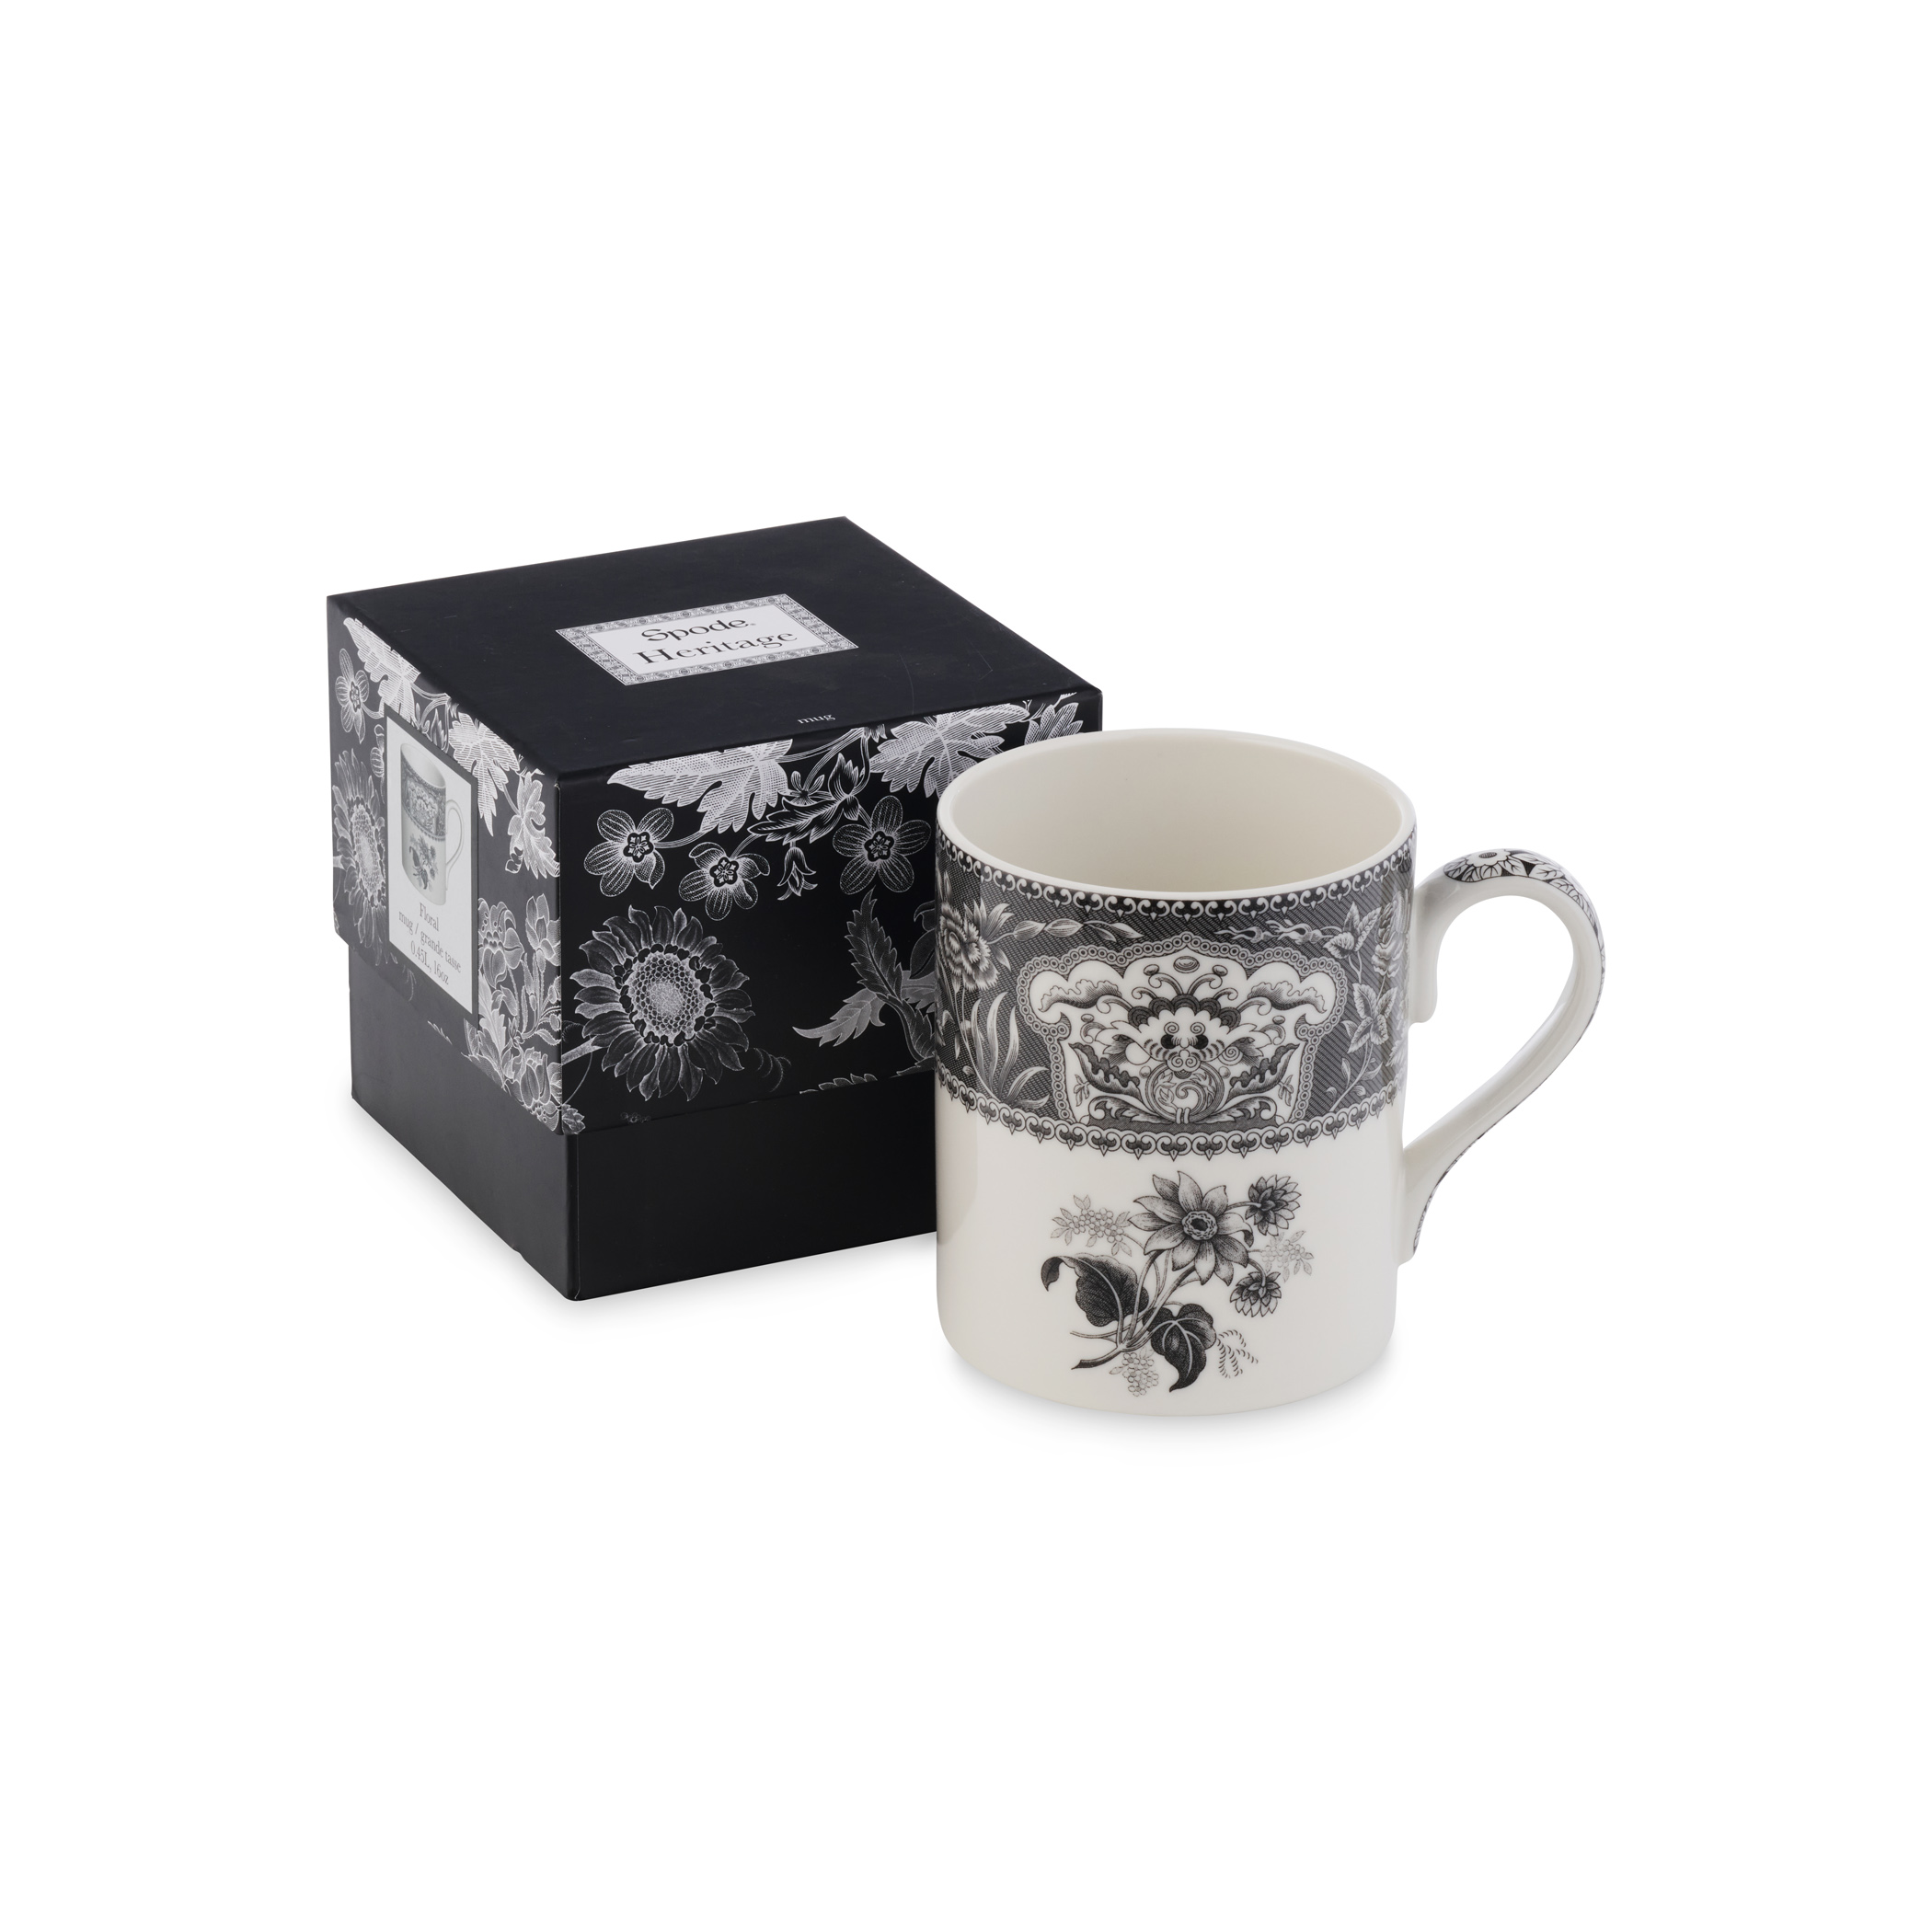 Heritage 16 Ounce Mug (Floral) image number null